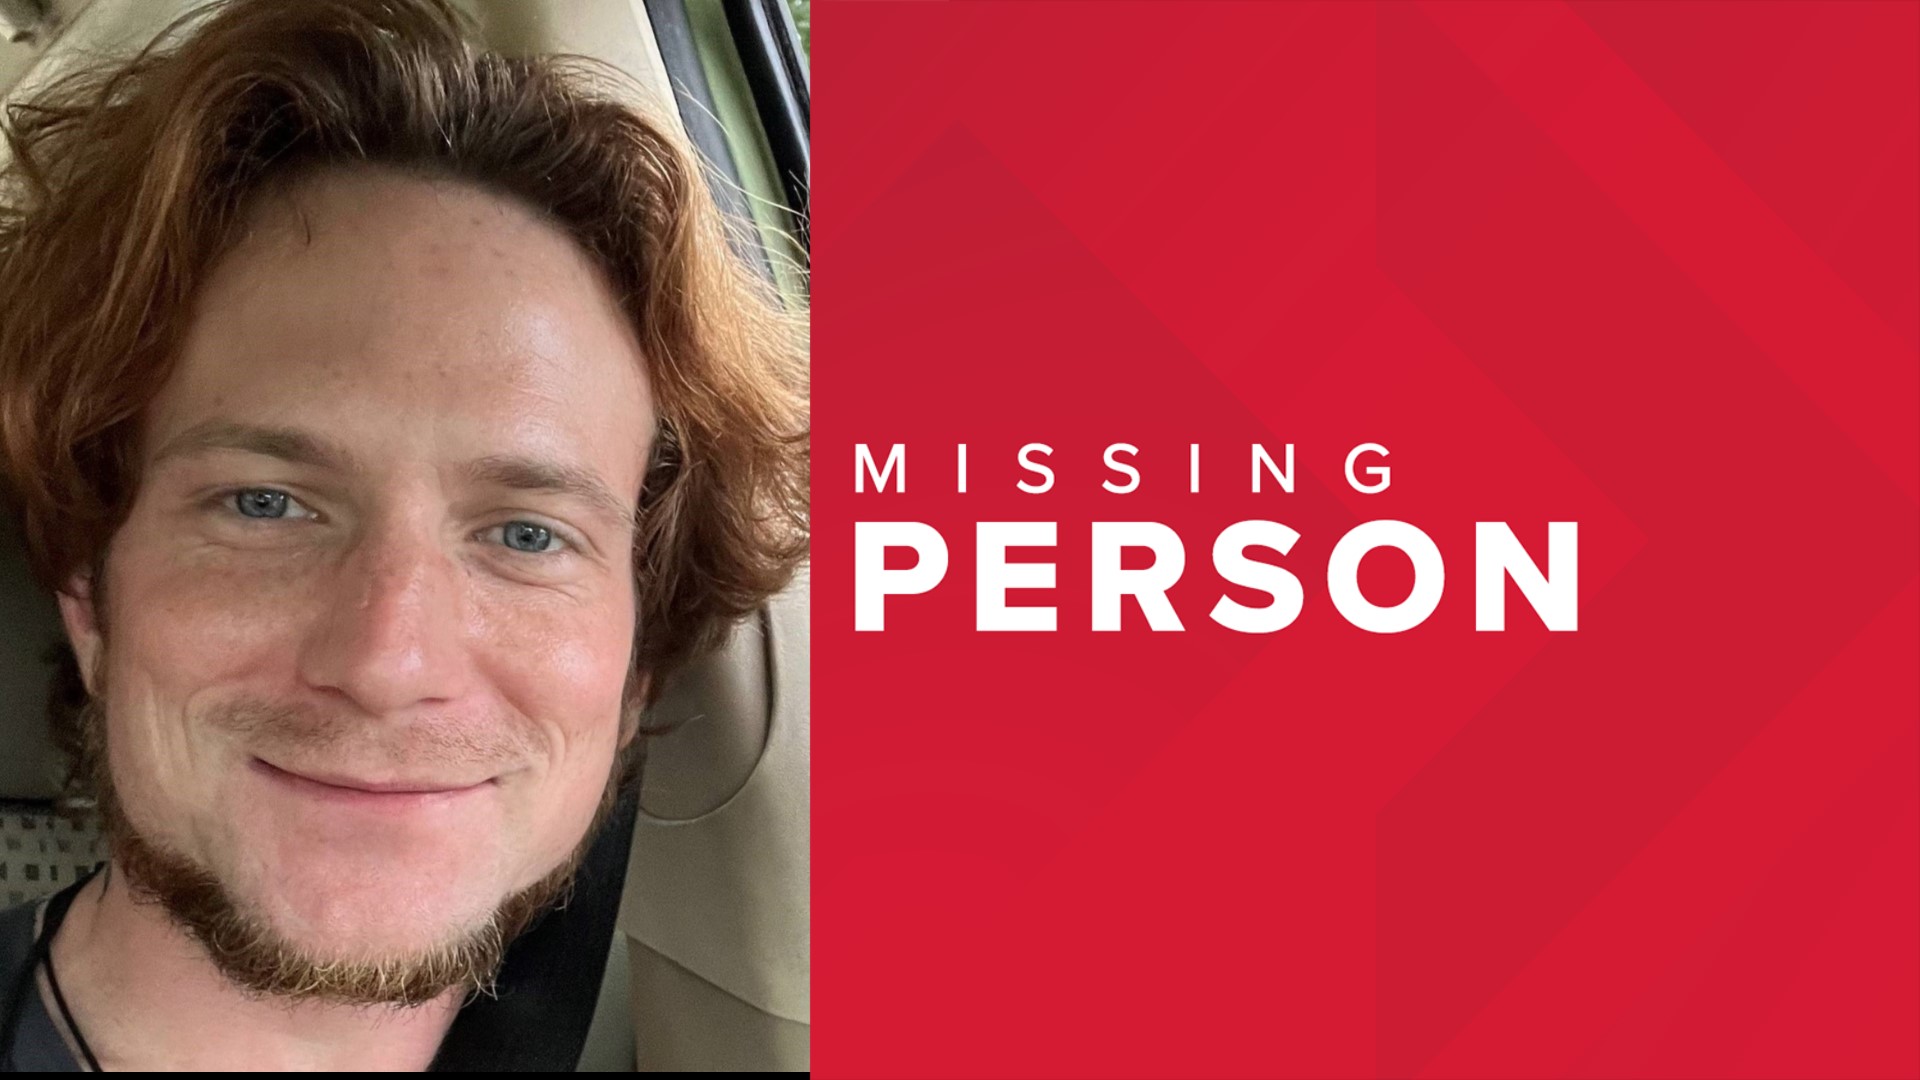 A Gaston County man was reported missing after his car was found abandoned, police said.